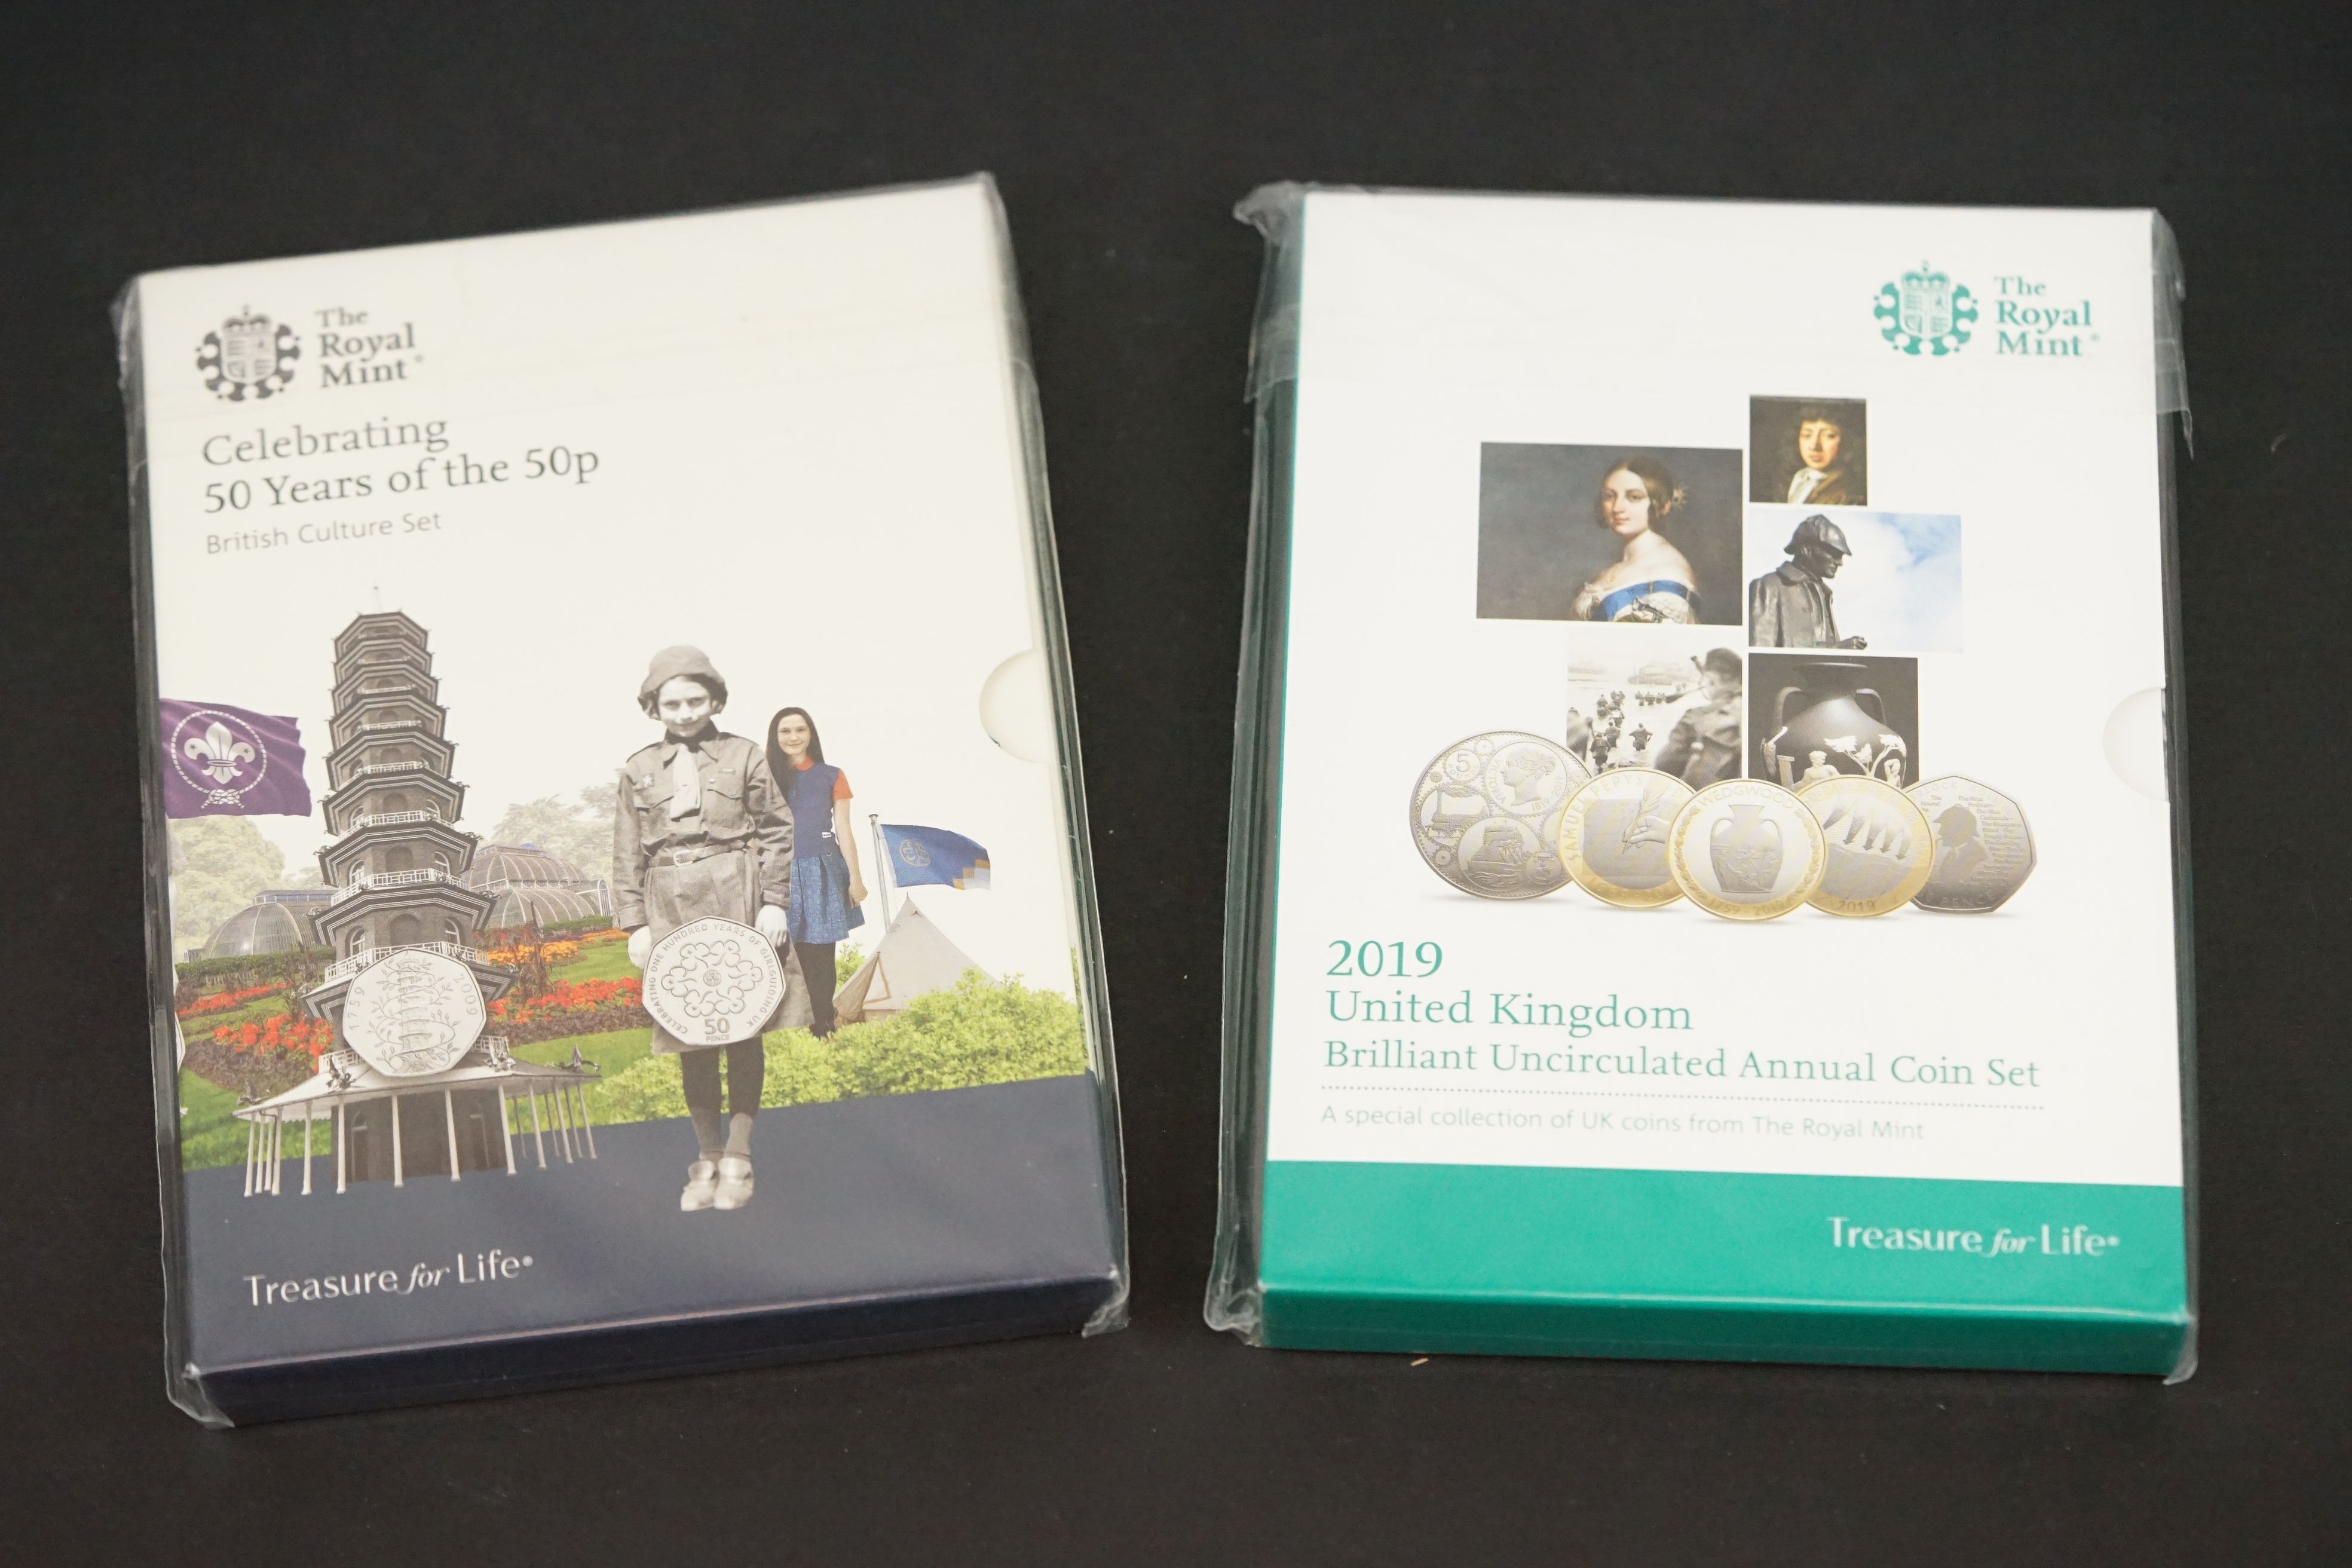 A Royal Mint 2019 United Kingdom brilliant uncirculated annual coin set together with a